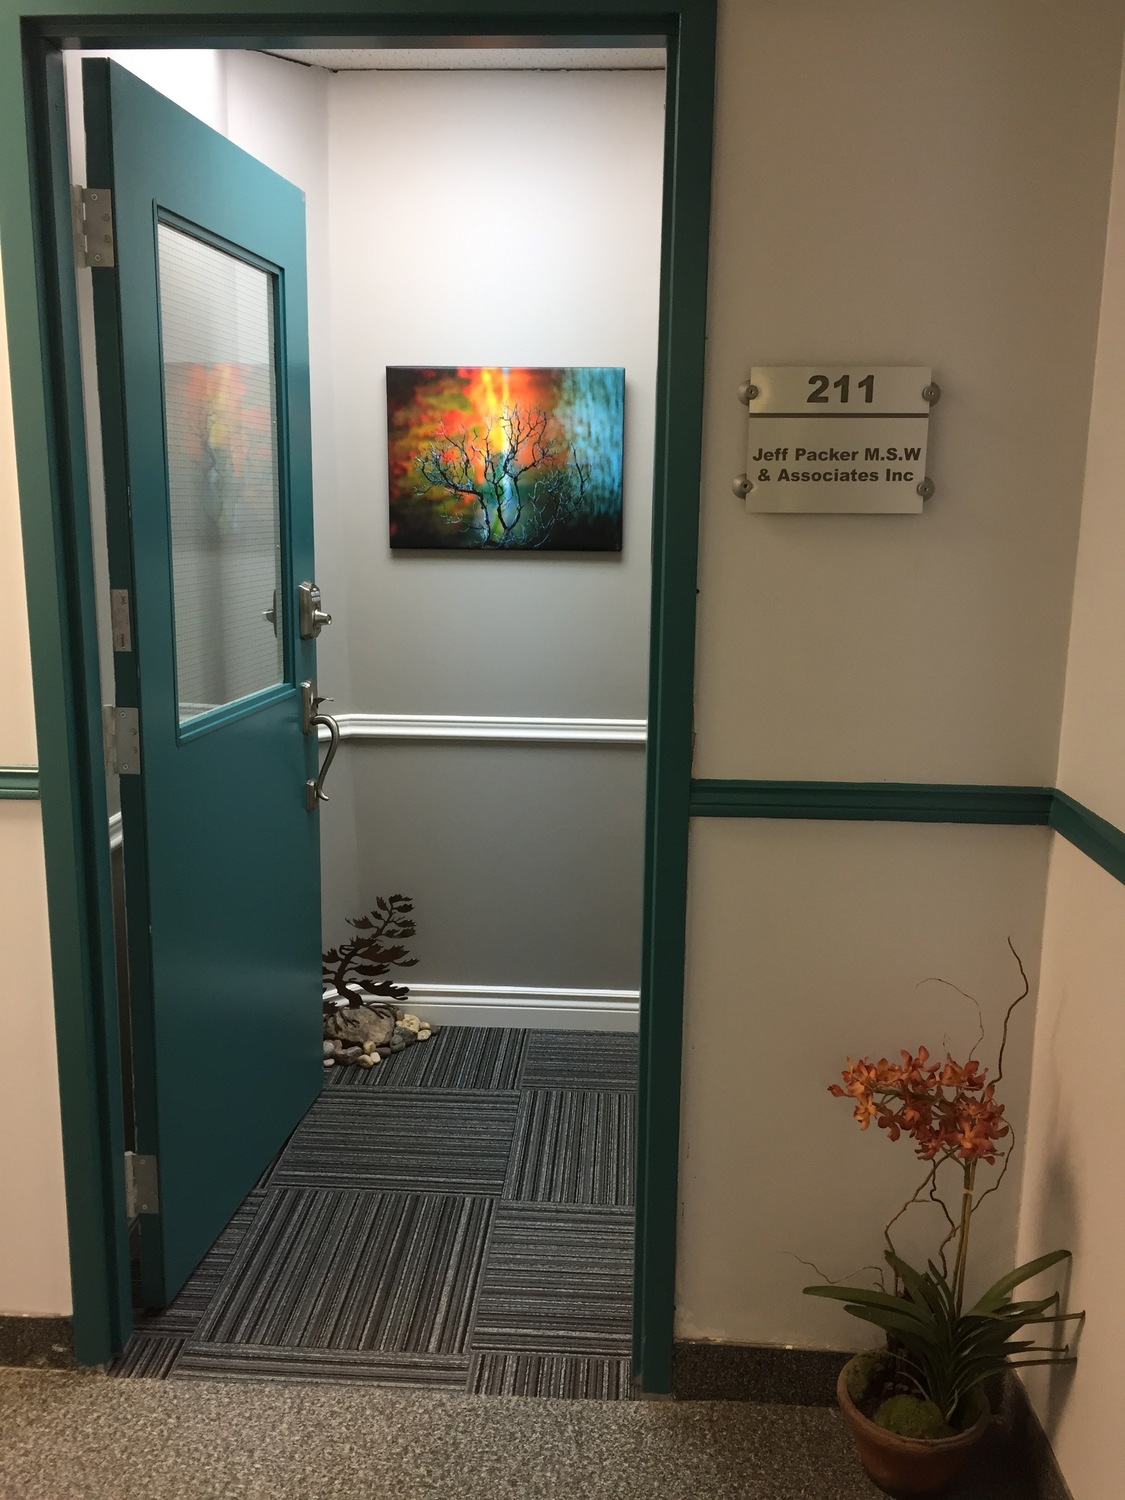 Gallery Photo of Welcome to Jeff Packer MSW & Associates Offices